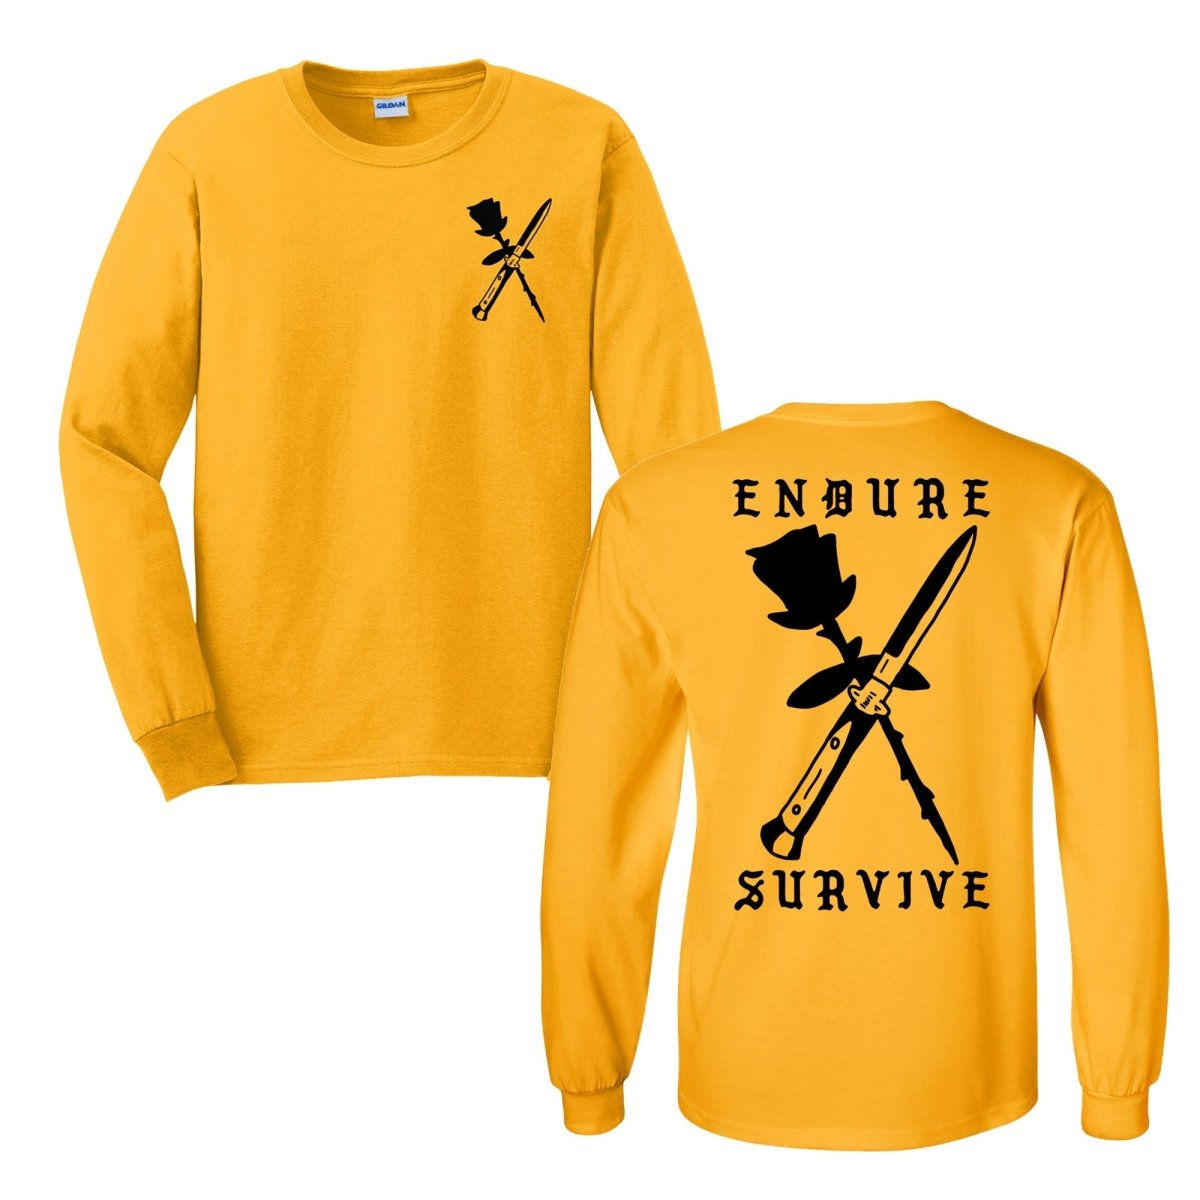 Endure Survive Rose and Switchblade Long Sleeve Tee - Long Sleeve T-Shirt - Pretty Bad Co.